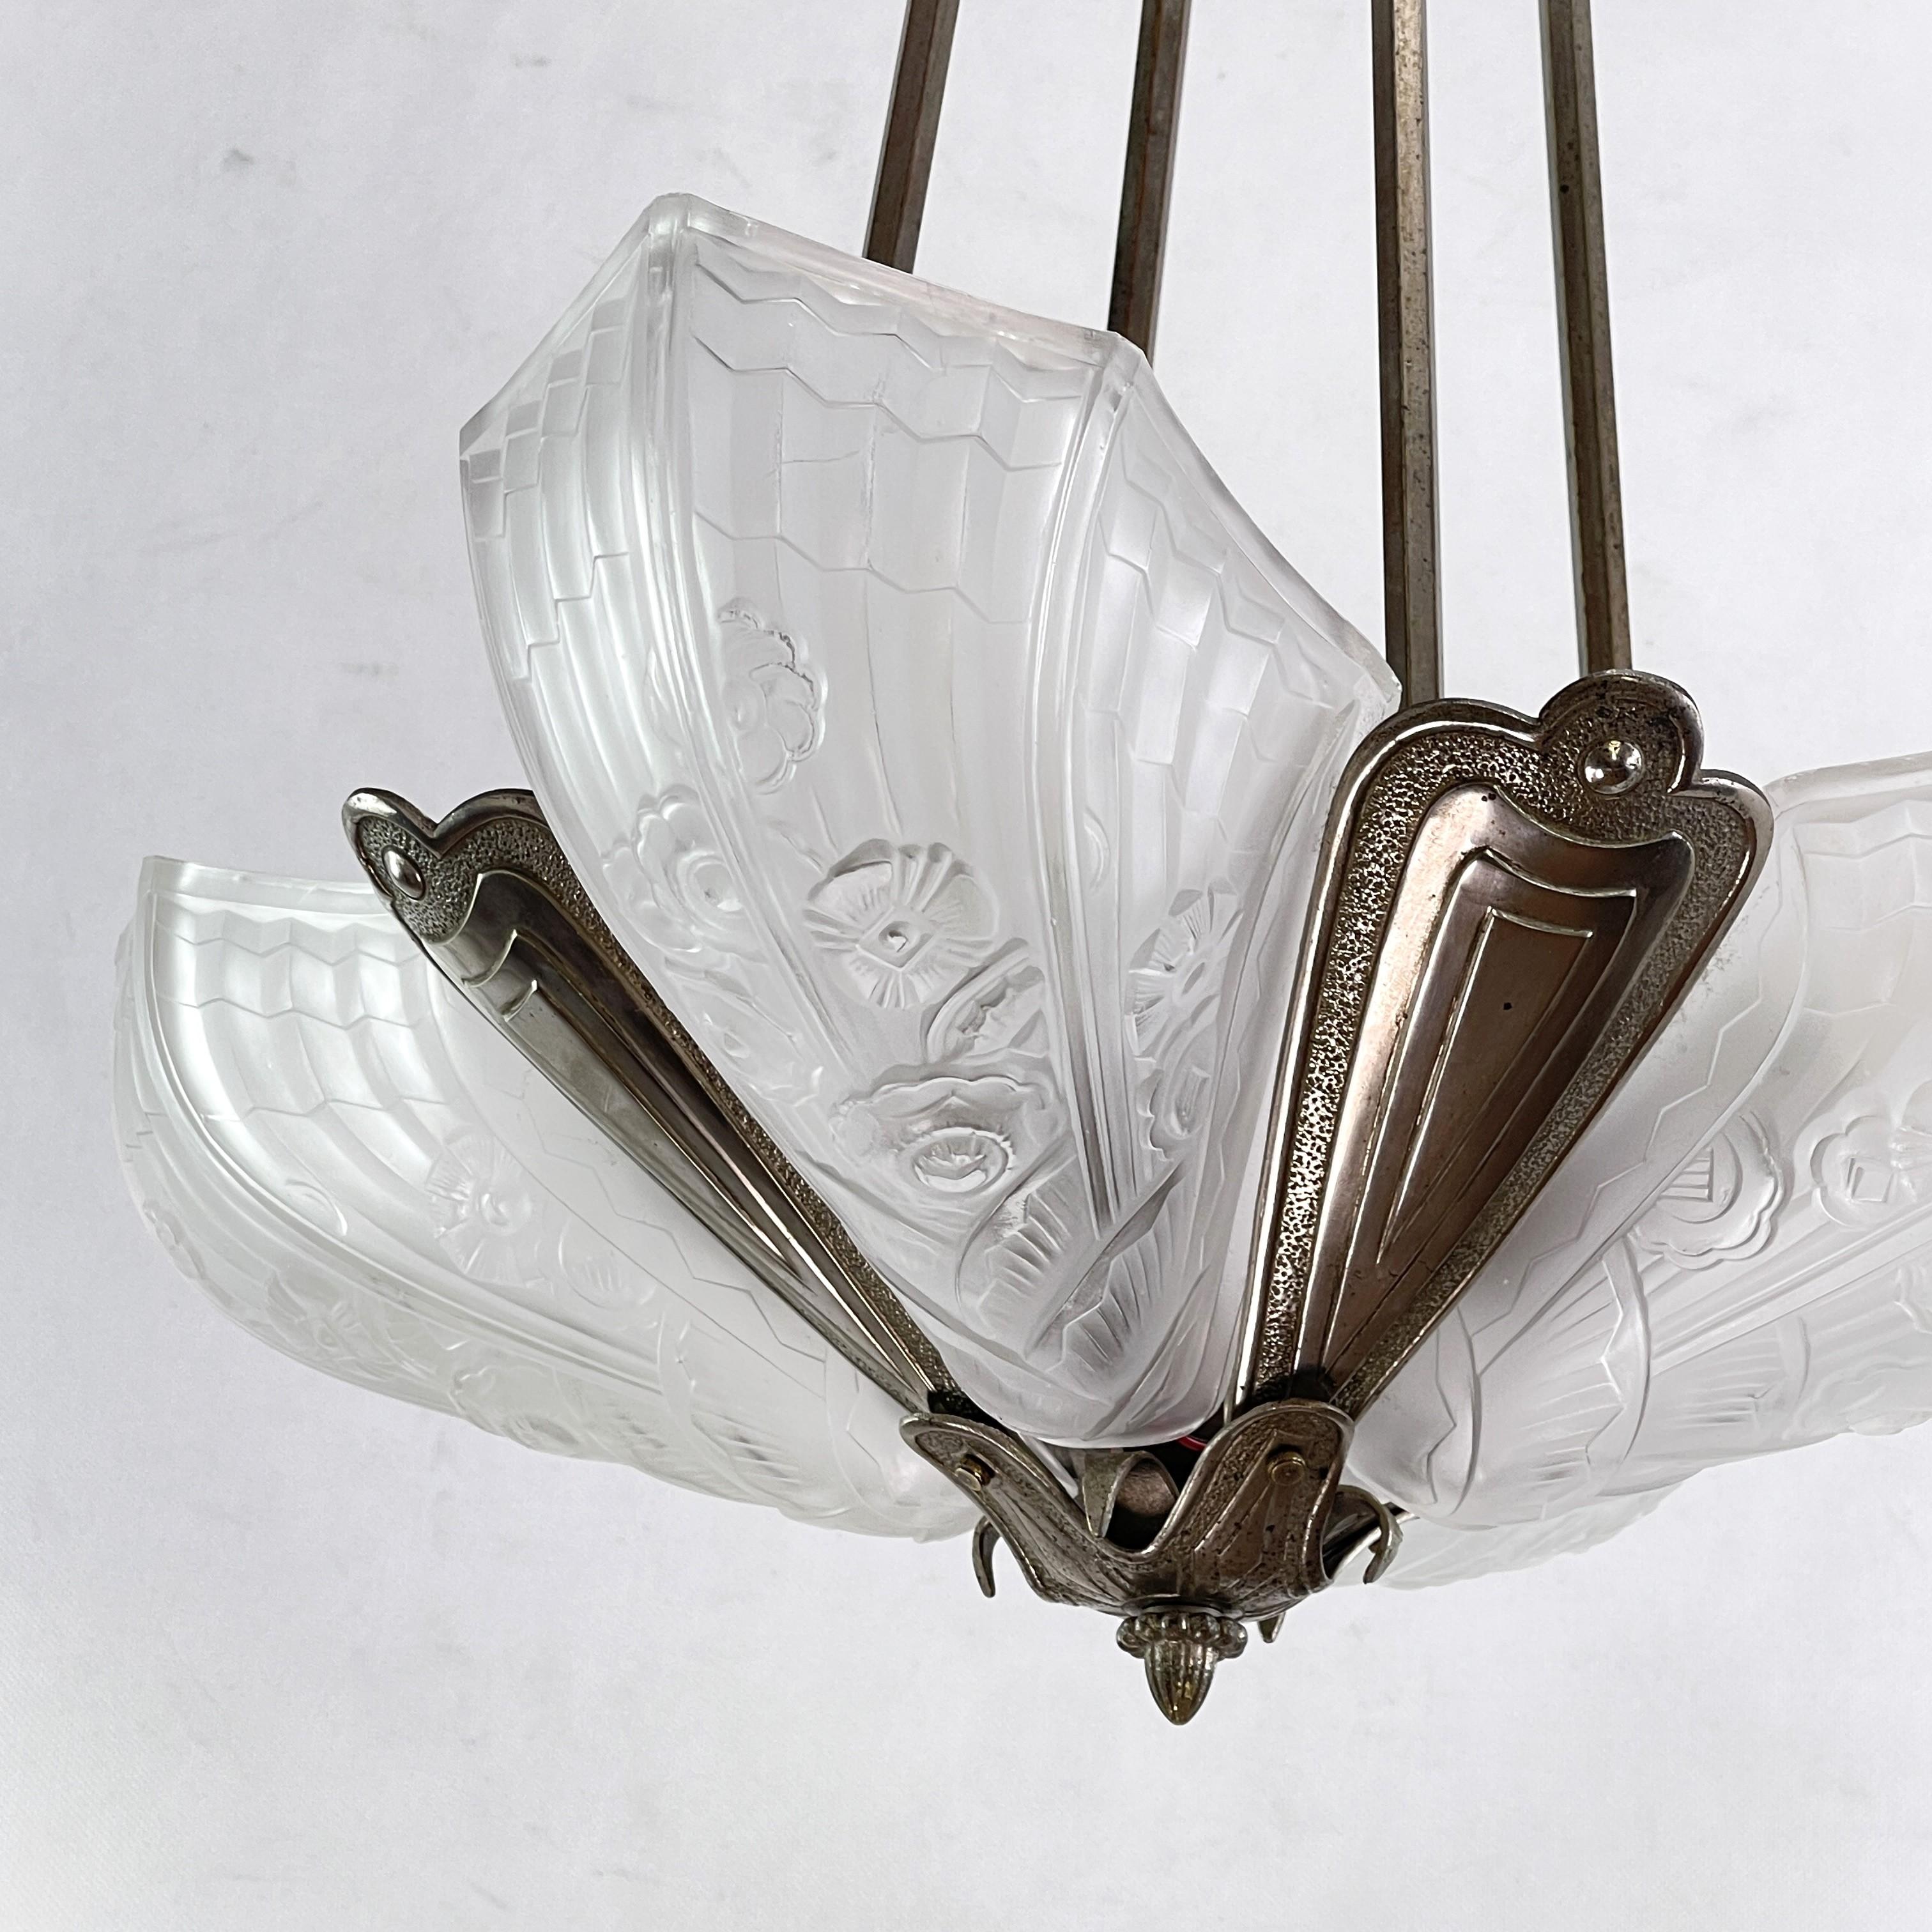 French Art Deco Chandelier Hanging Lamp by Jean Gauthier for J. Robert Paris, 1930s